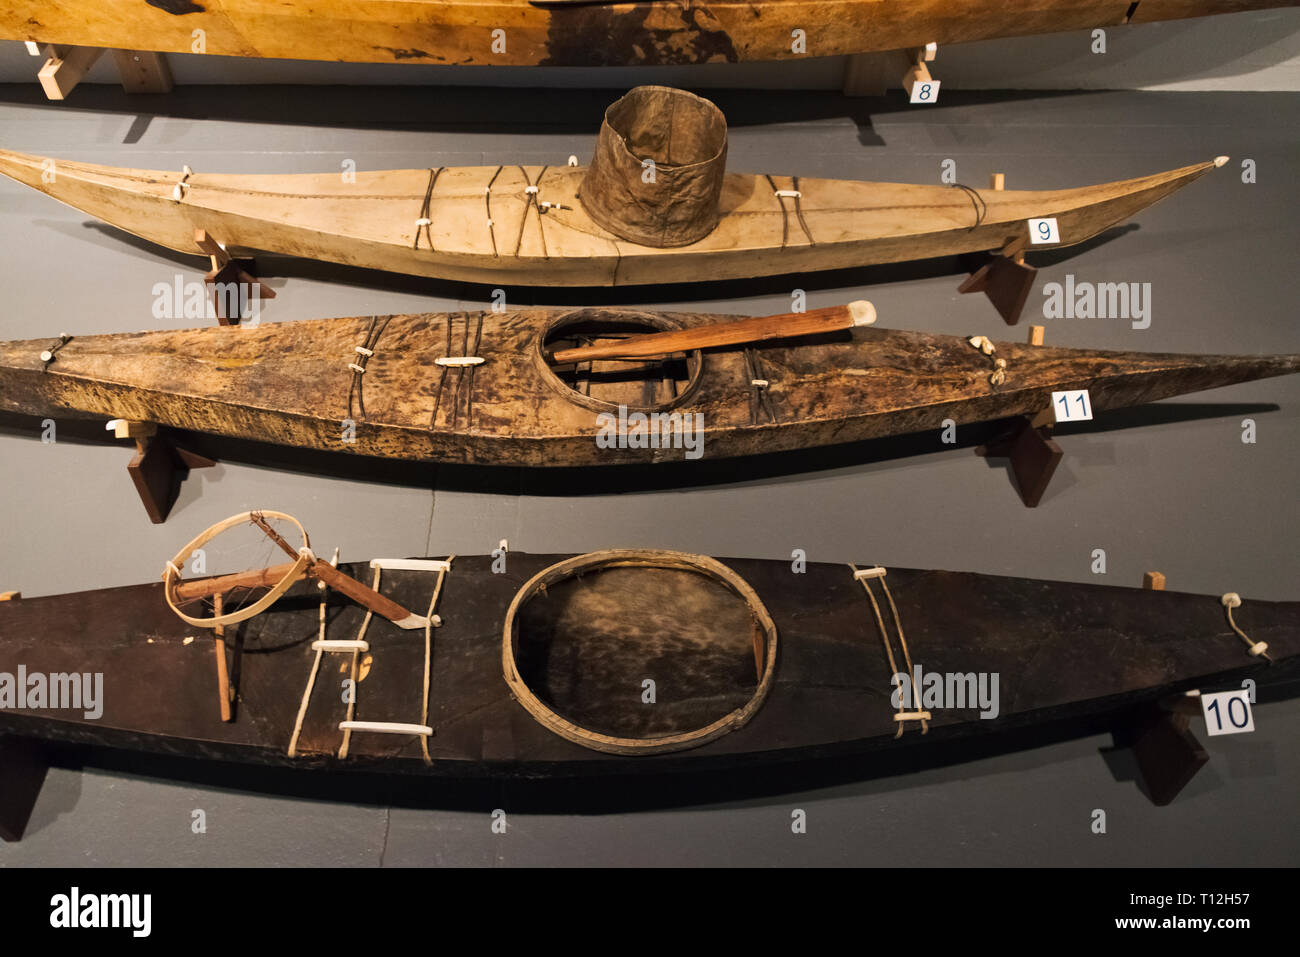 Kayak display of Inuit people's early life in the National Museum, Nuuk ...